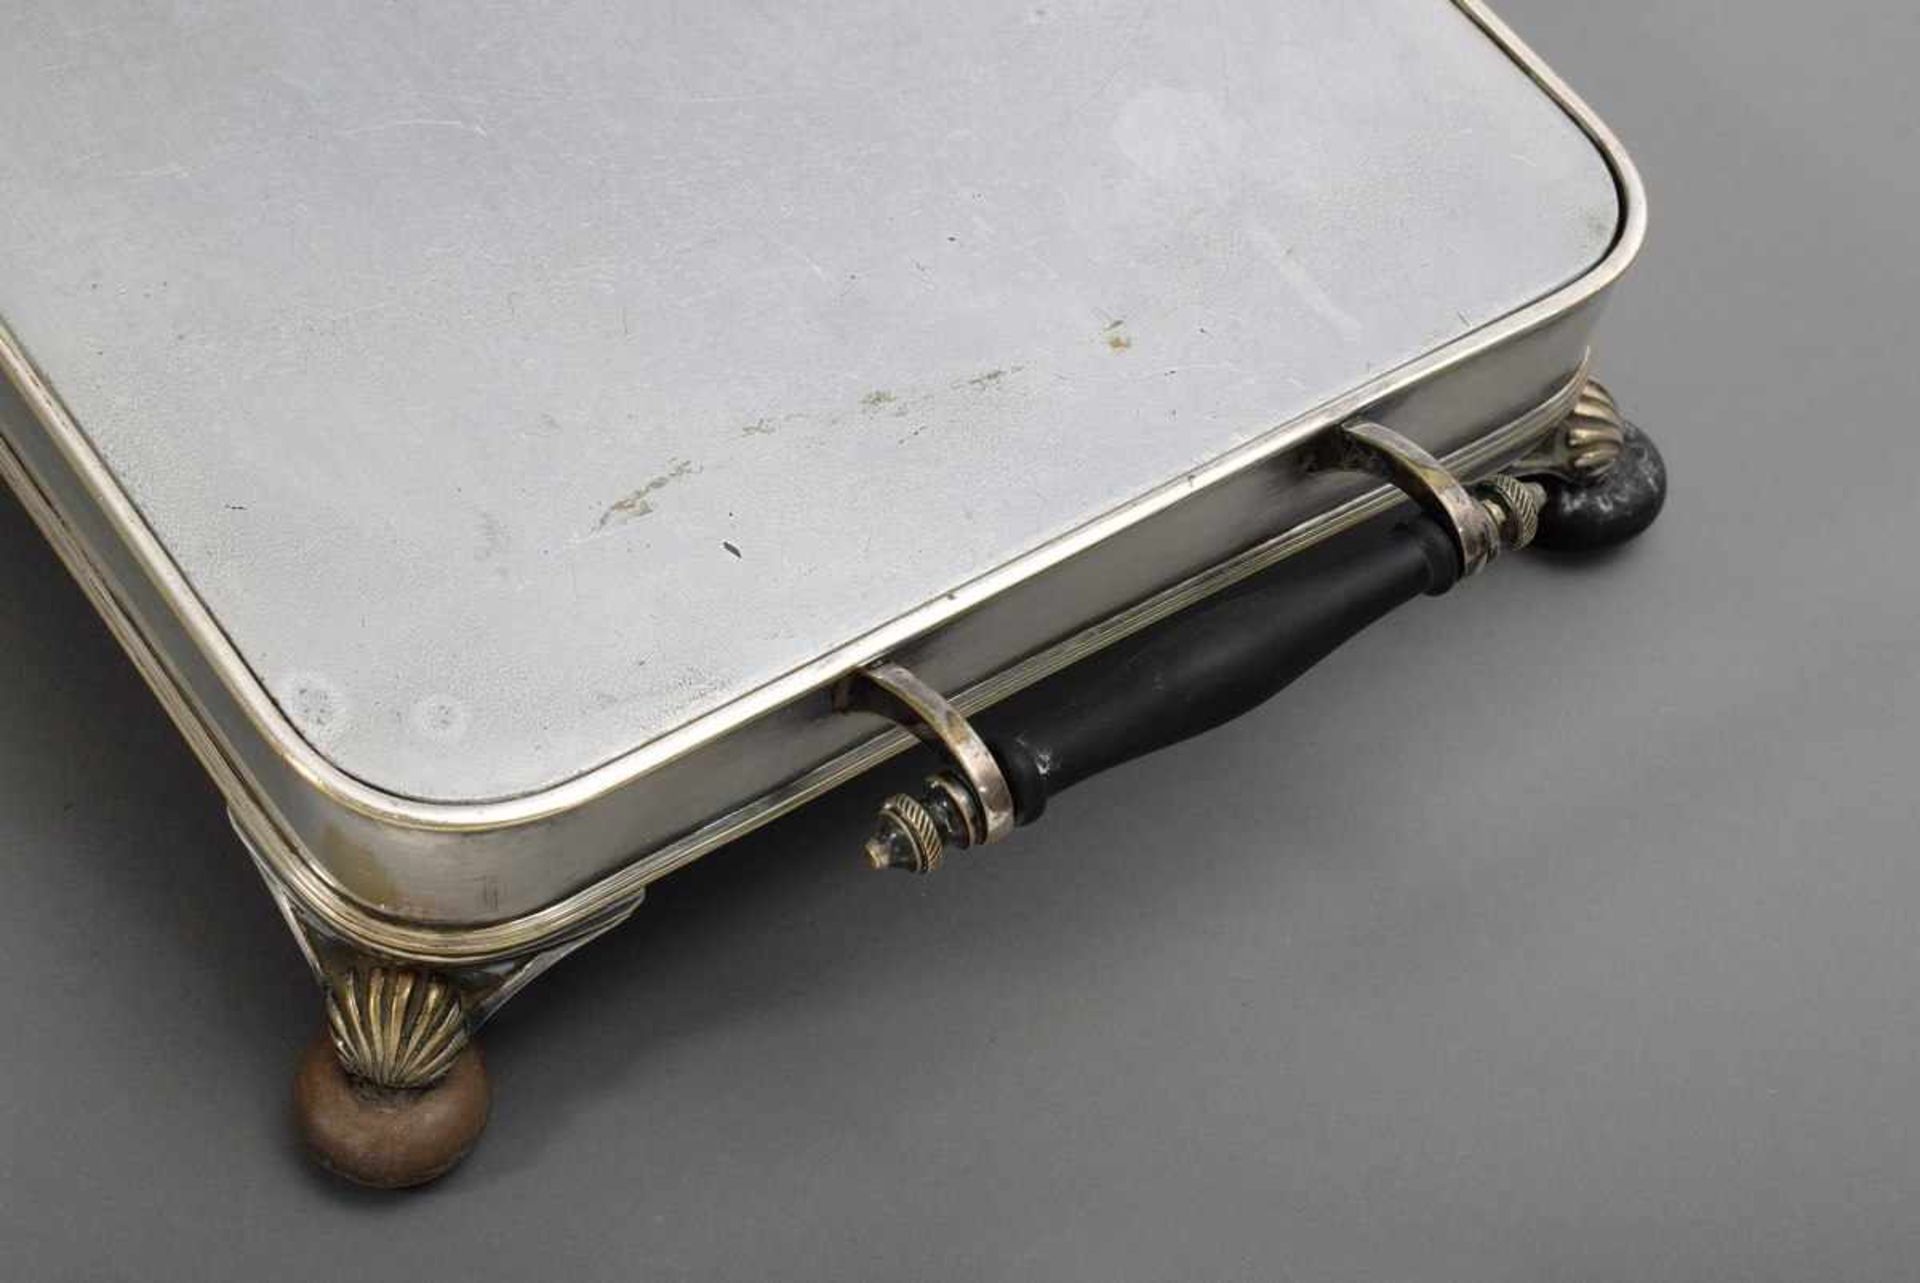 Elongated rechaud, silver plated with aluminium insert, 7x71x23,5cm, missing burner - Image 2 of 3